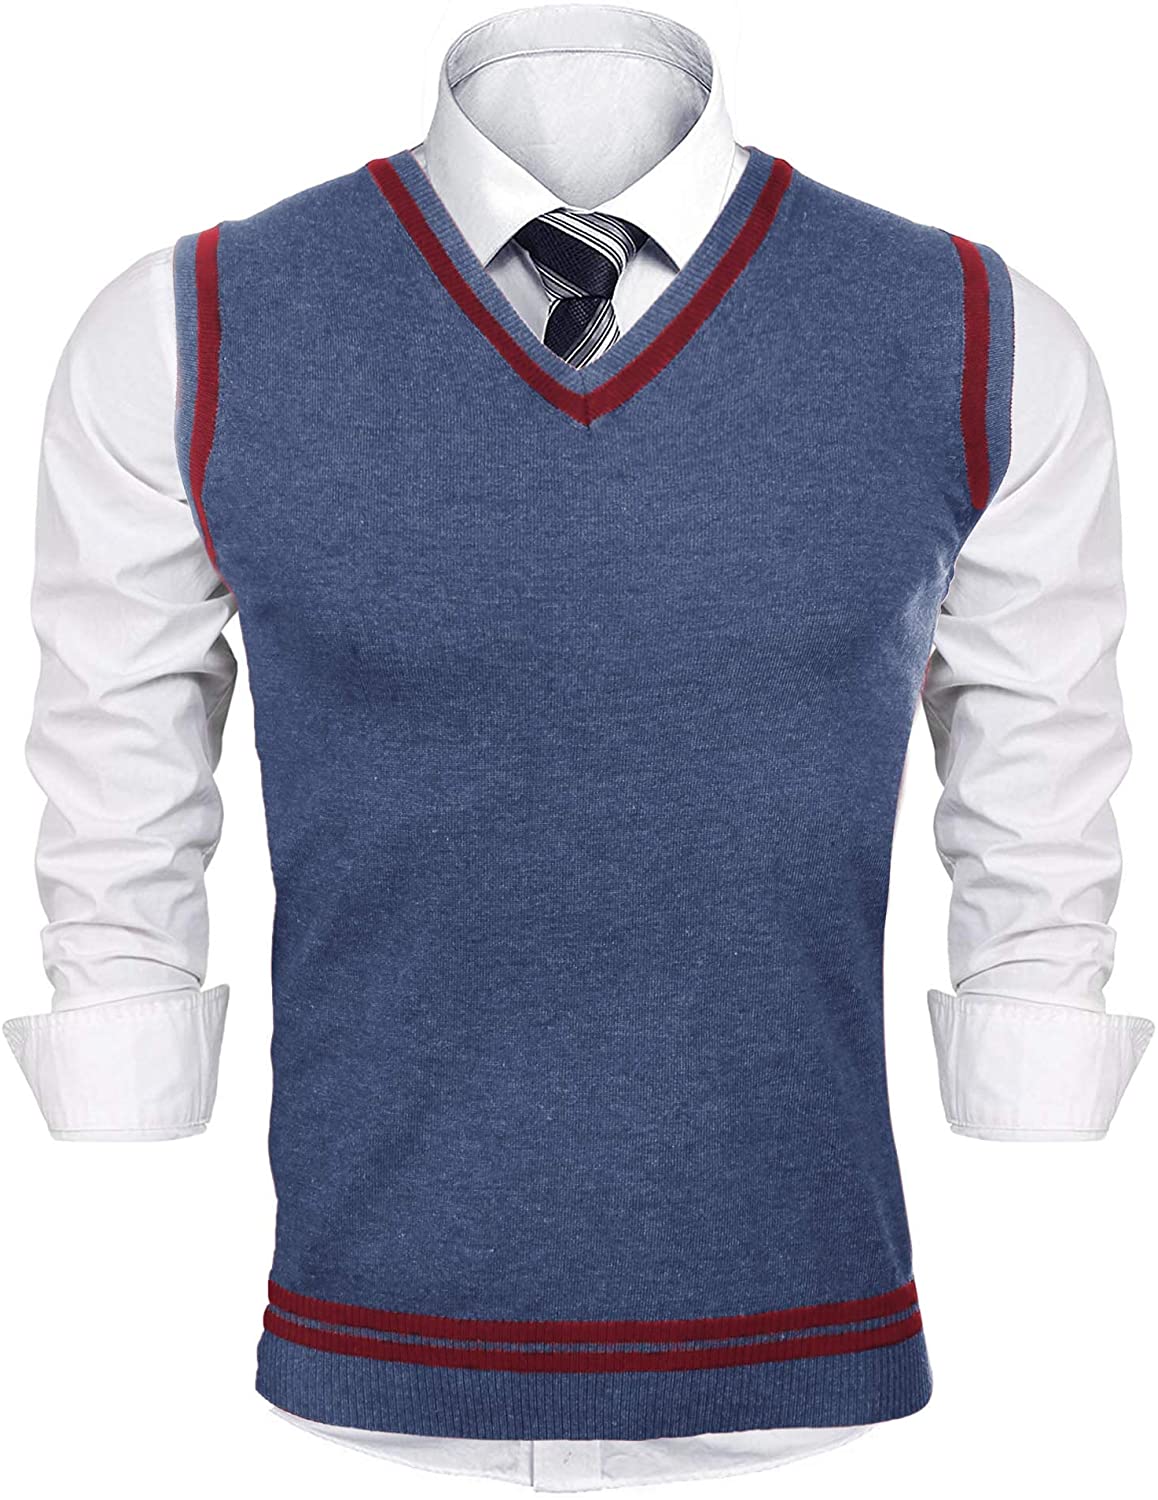 iClosam Mens Casual V-Neck Slim Fit Sweater Vest Knitted Lightweight ...